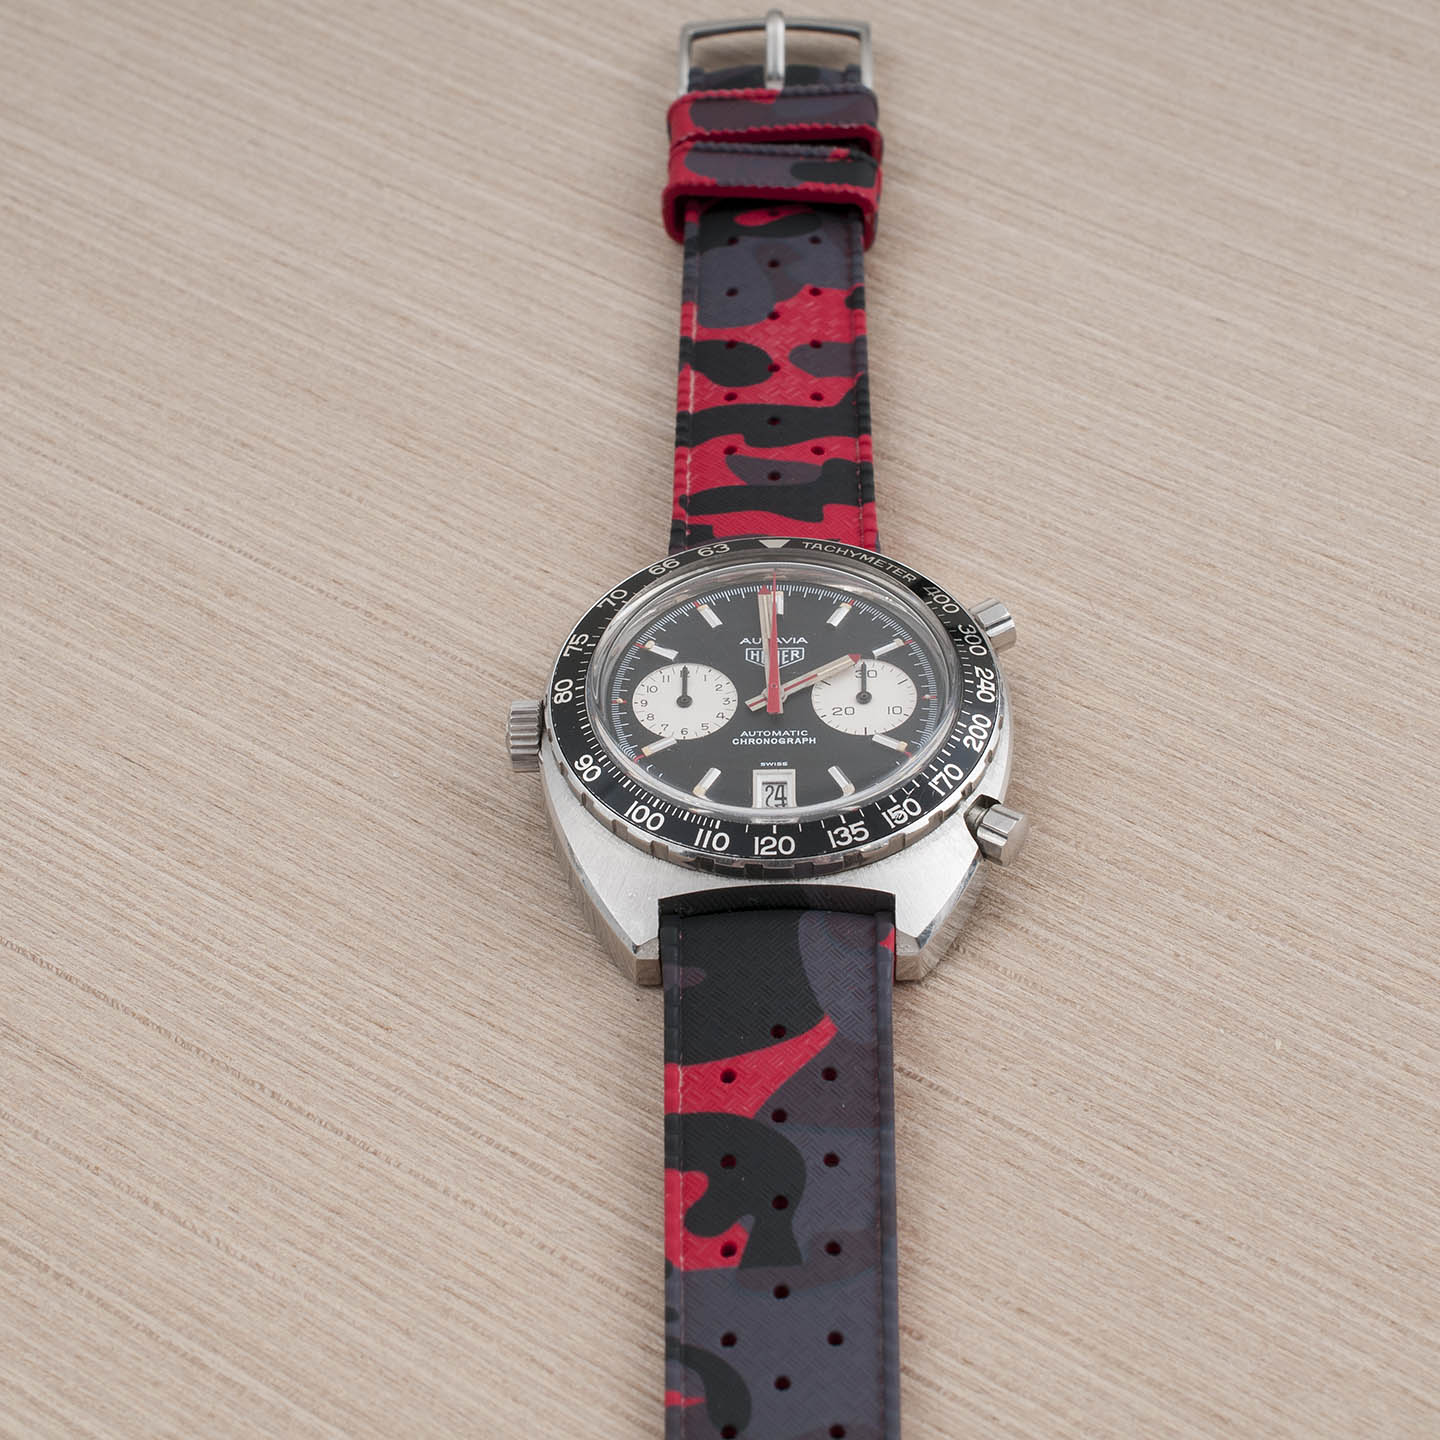 Tropical retro vintage replacement watch strap band FKM rubber tropic 19mm 20mm 21mm 22mm red camo camouflage heuer autavia viceroy 1163v